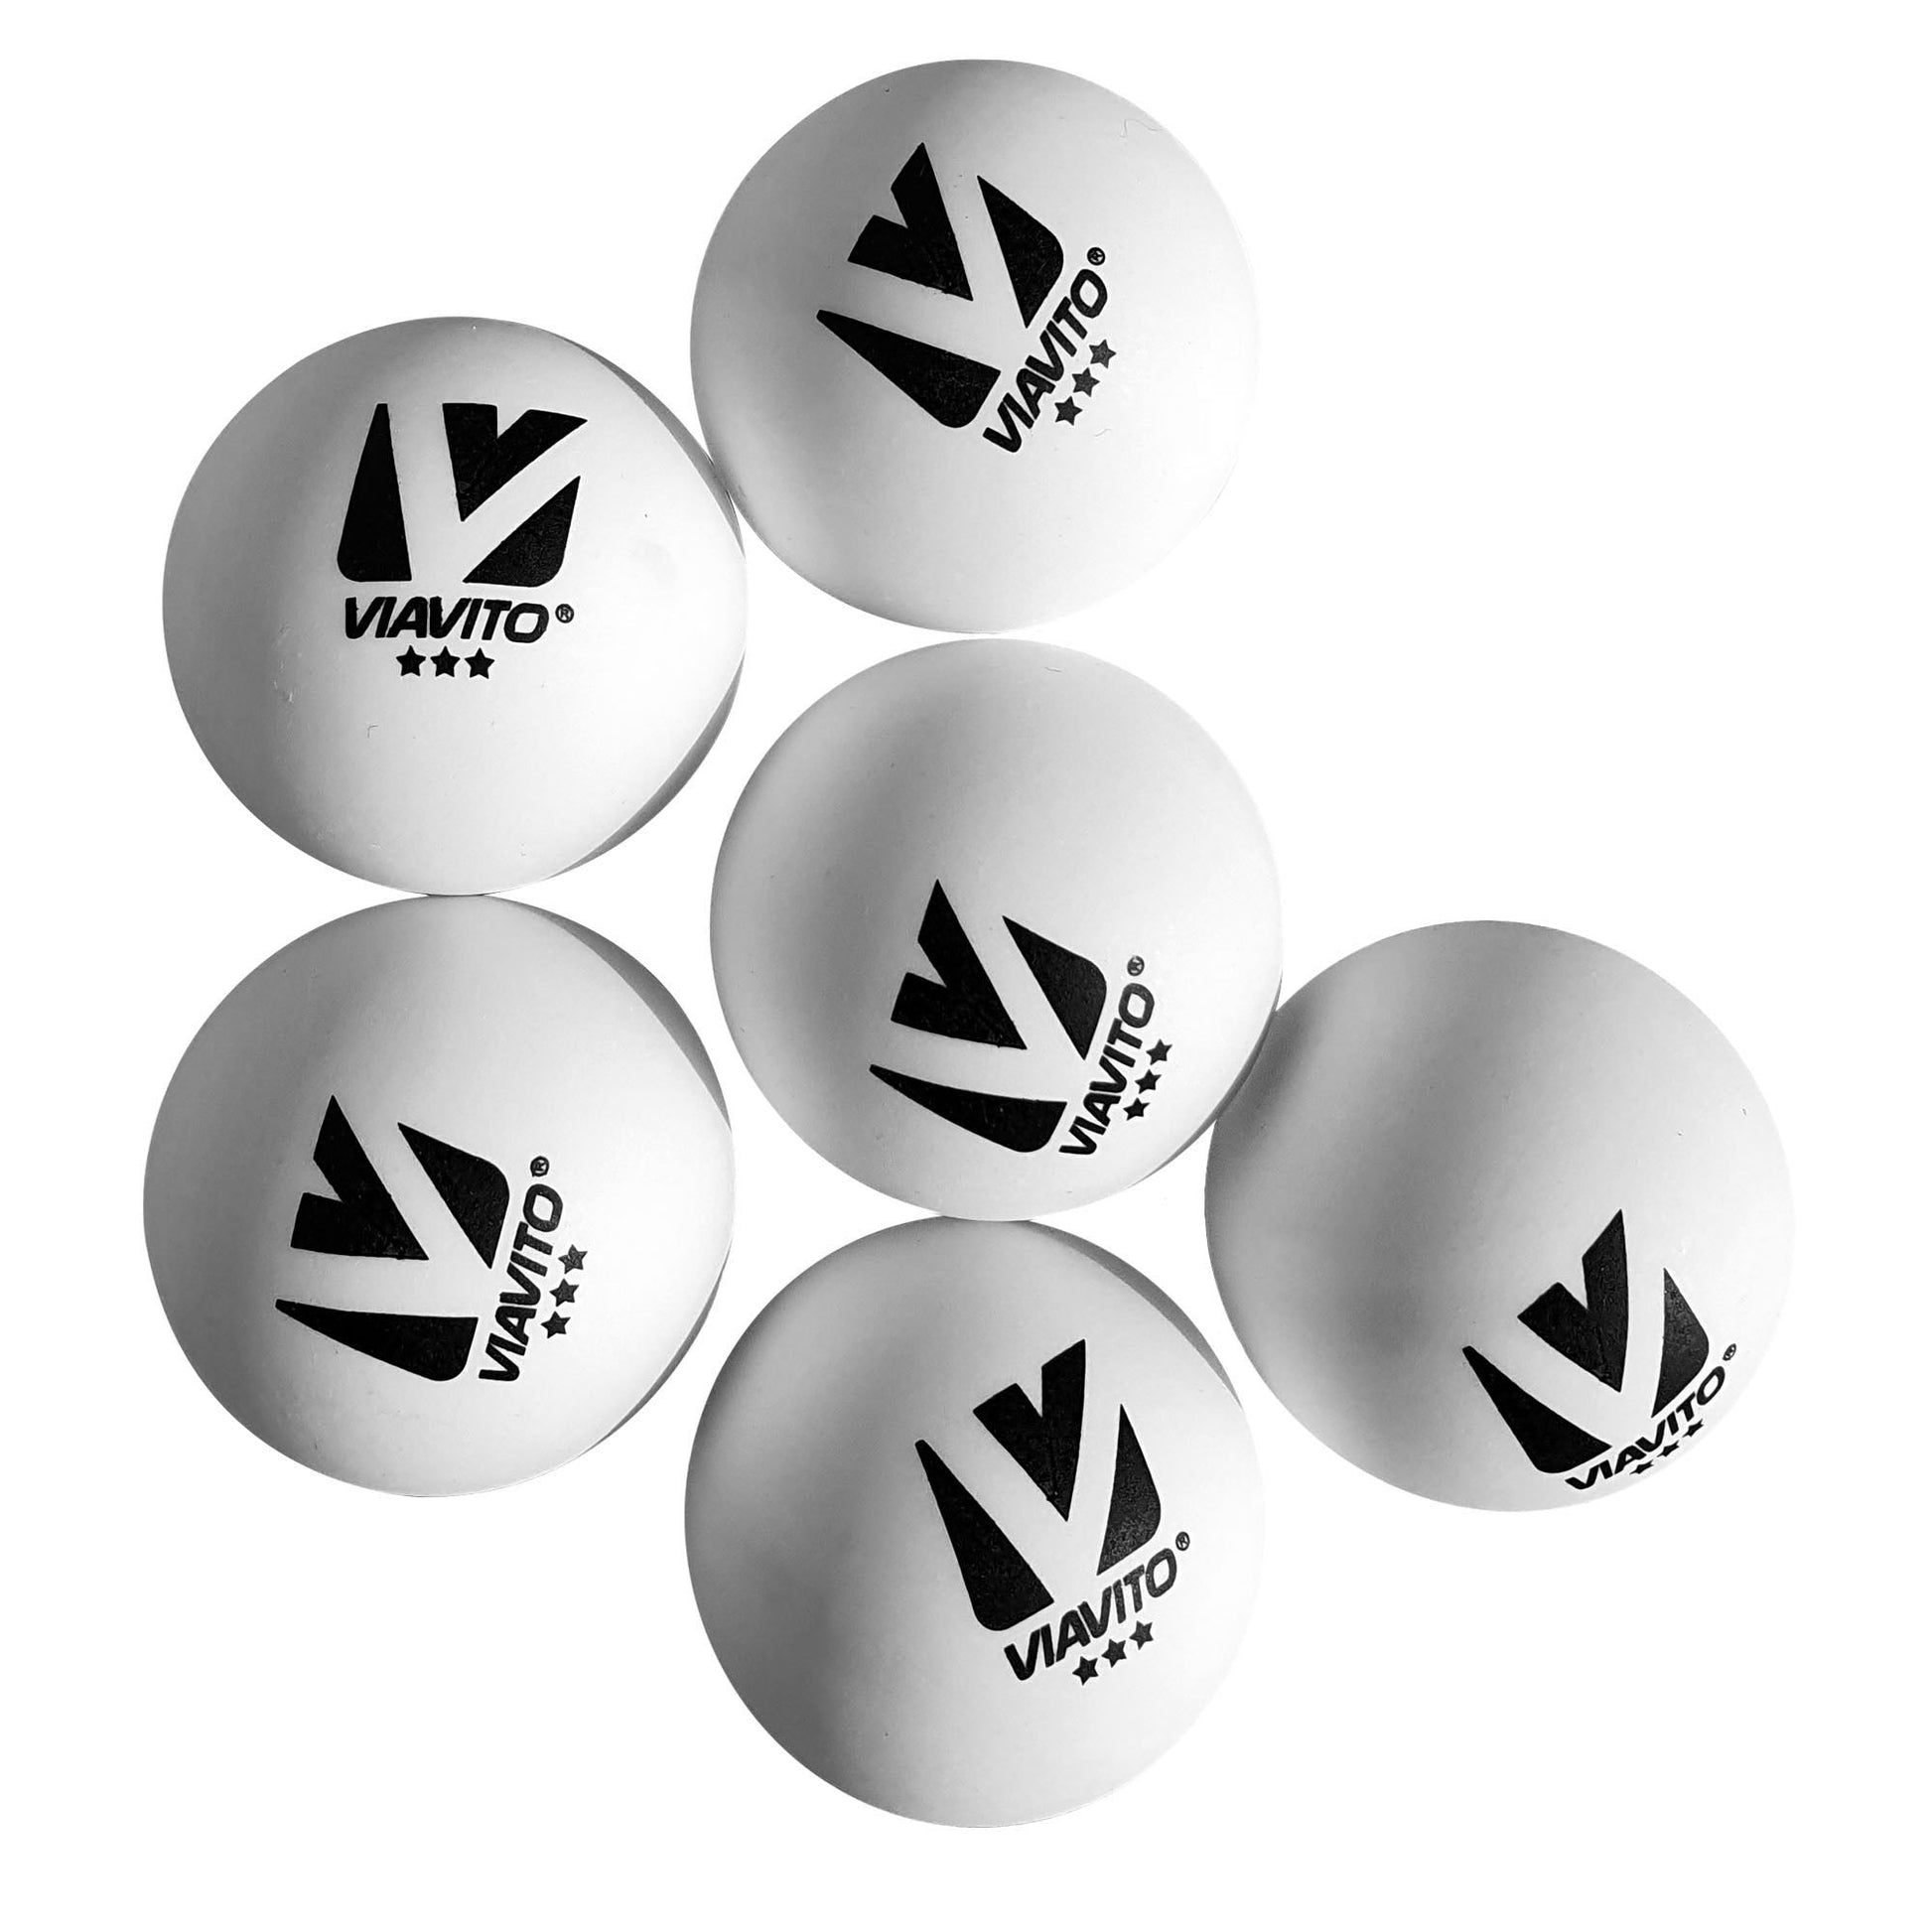 |Viavito Compete Pro 3 Star Table Tennis Balls - Pack of 6 - New - Ballz2|